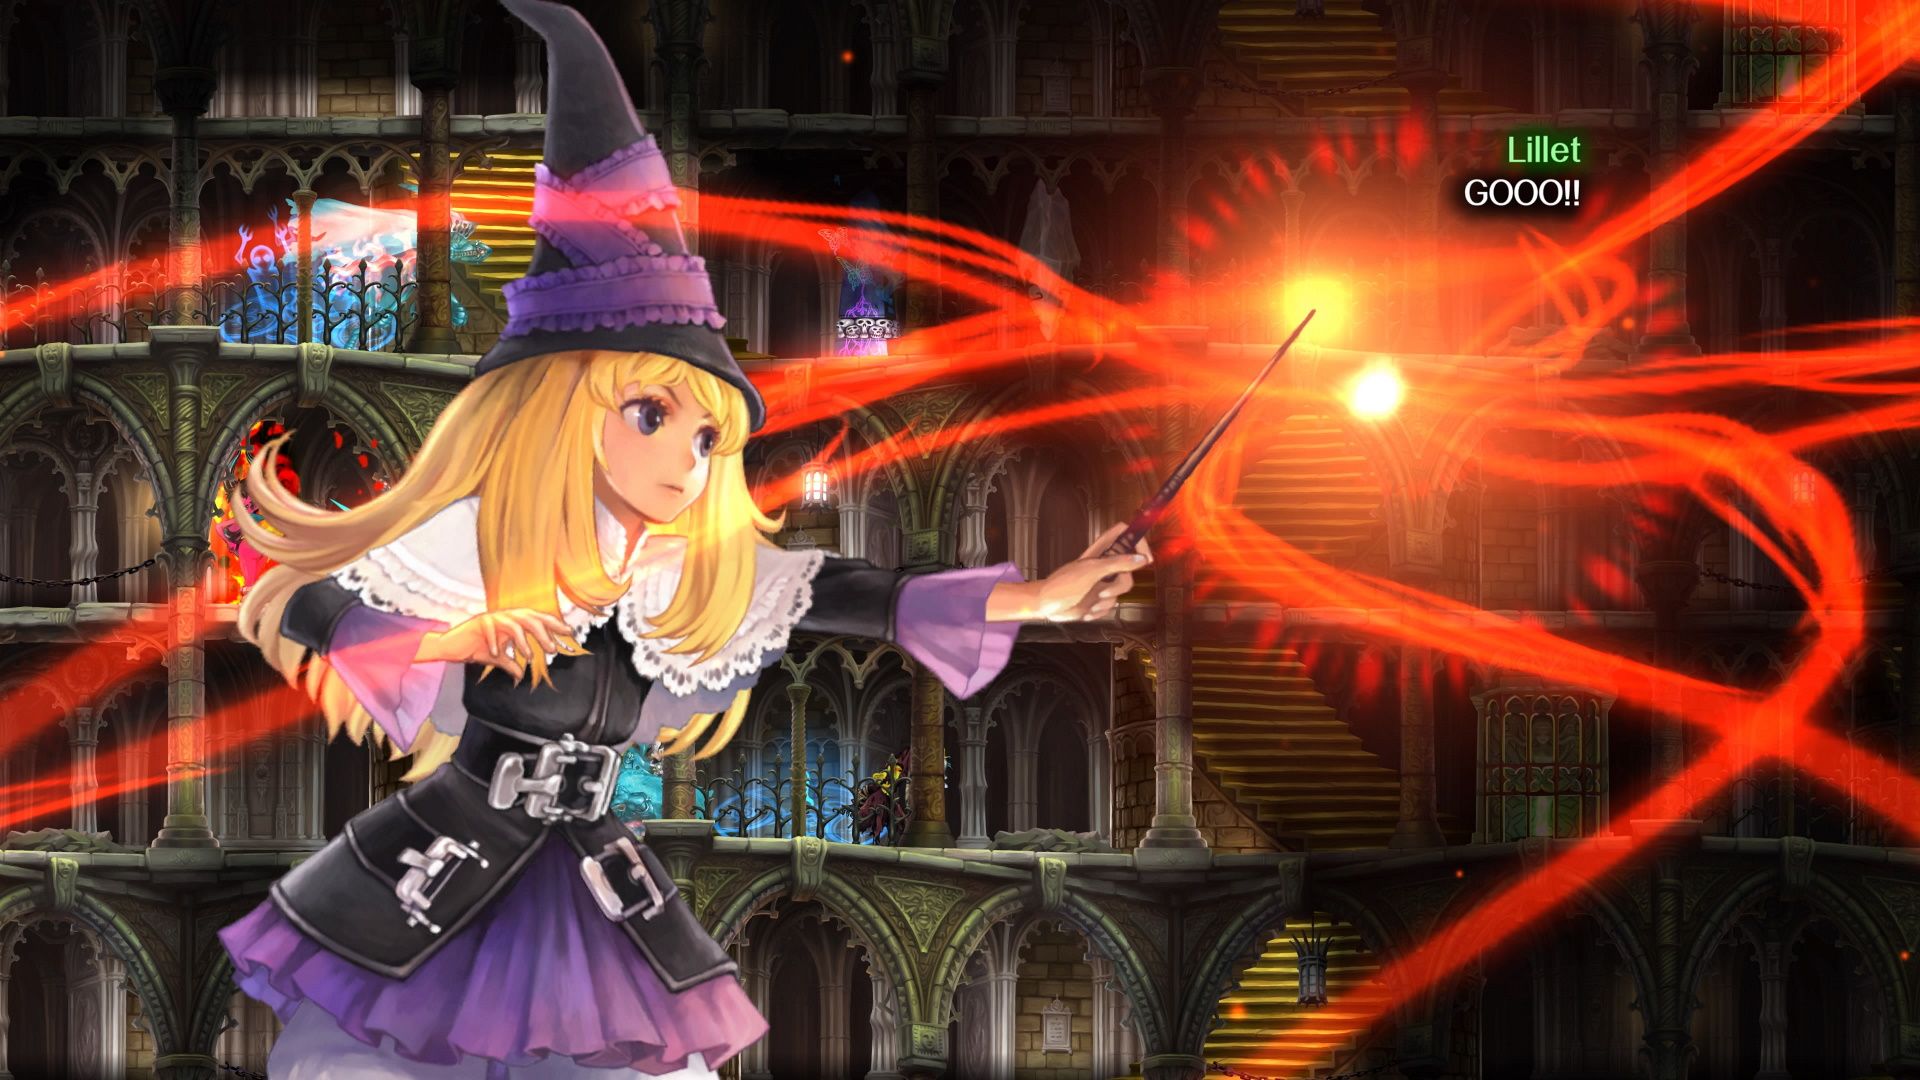 GrimGrimoire OnceMore, Lillet is casting a Grand Magic spell